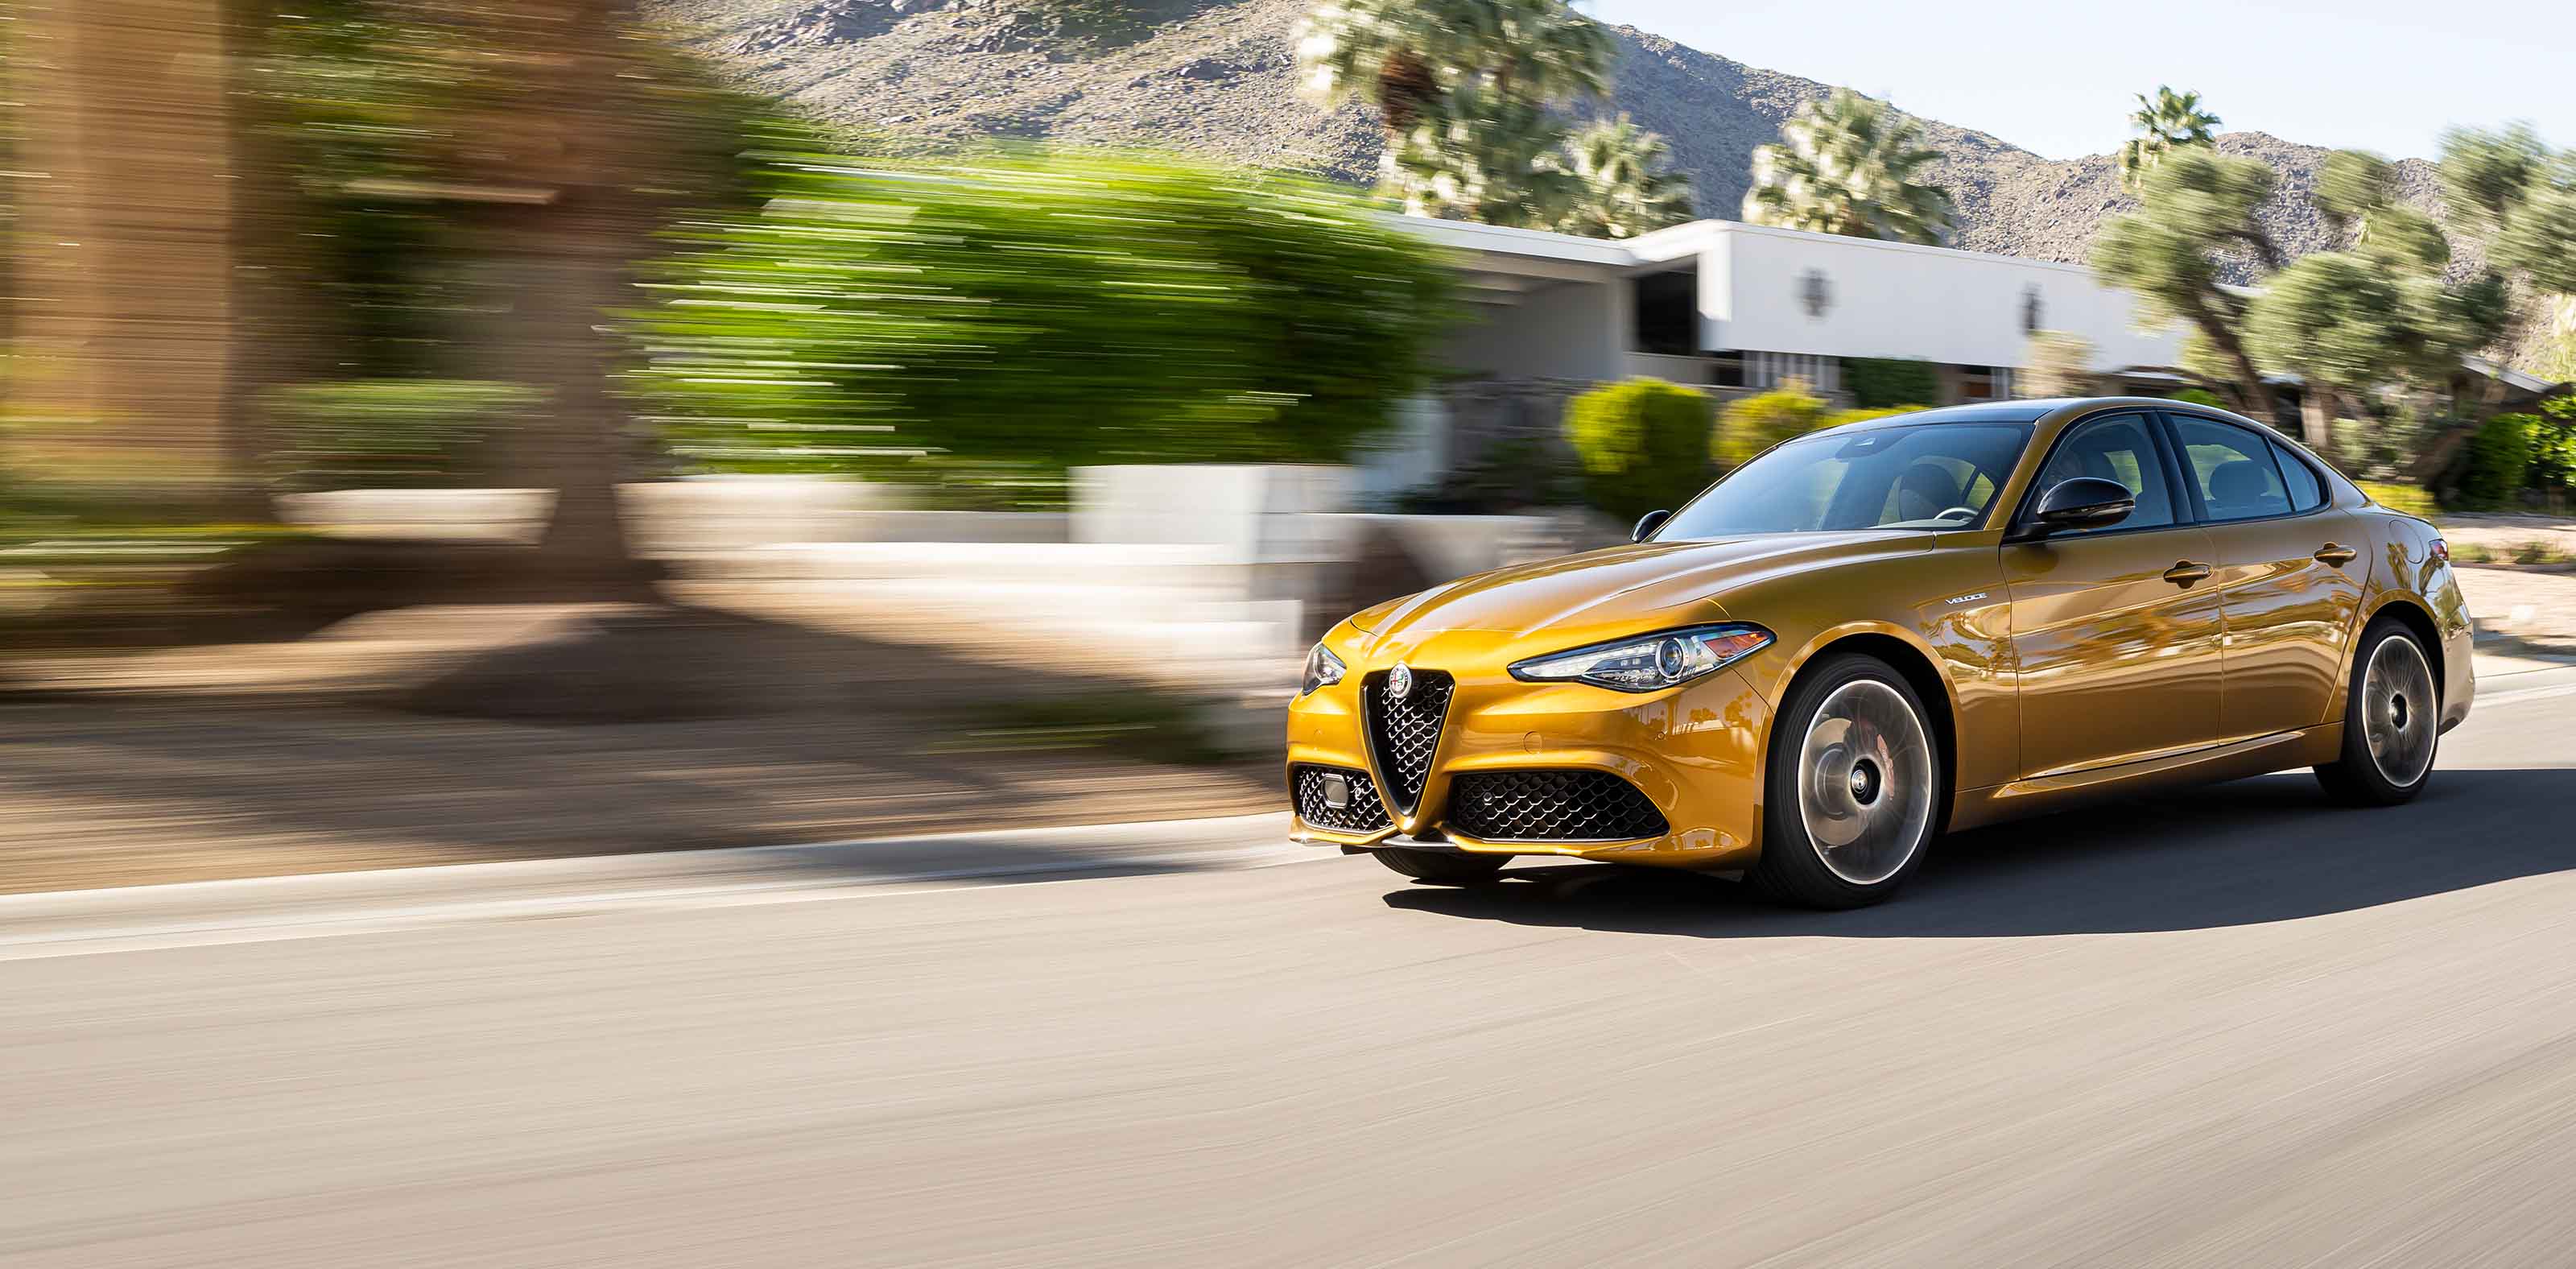 A gold 2023 Alfa Romeo Giulia Veloce being driven on a street with mountains in the distance, the background is blurred to indicate the speed of the vehicle.